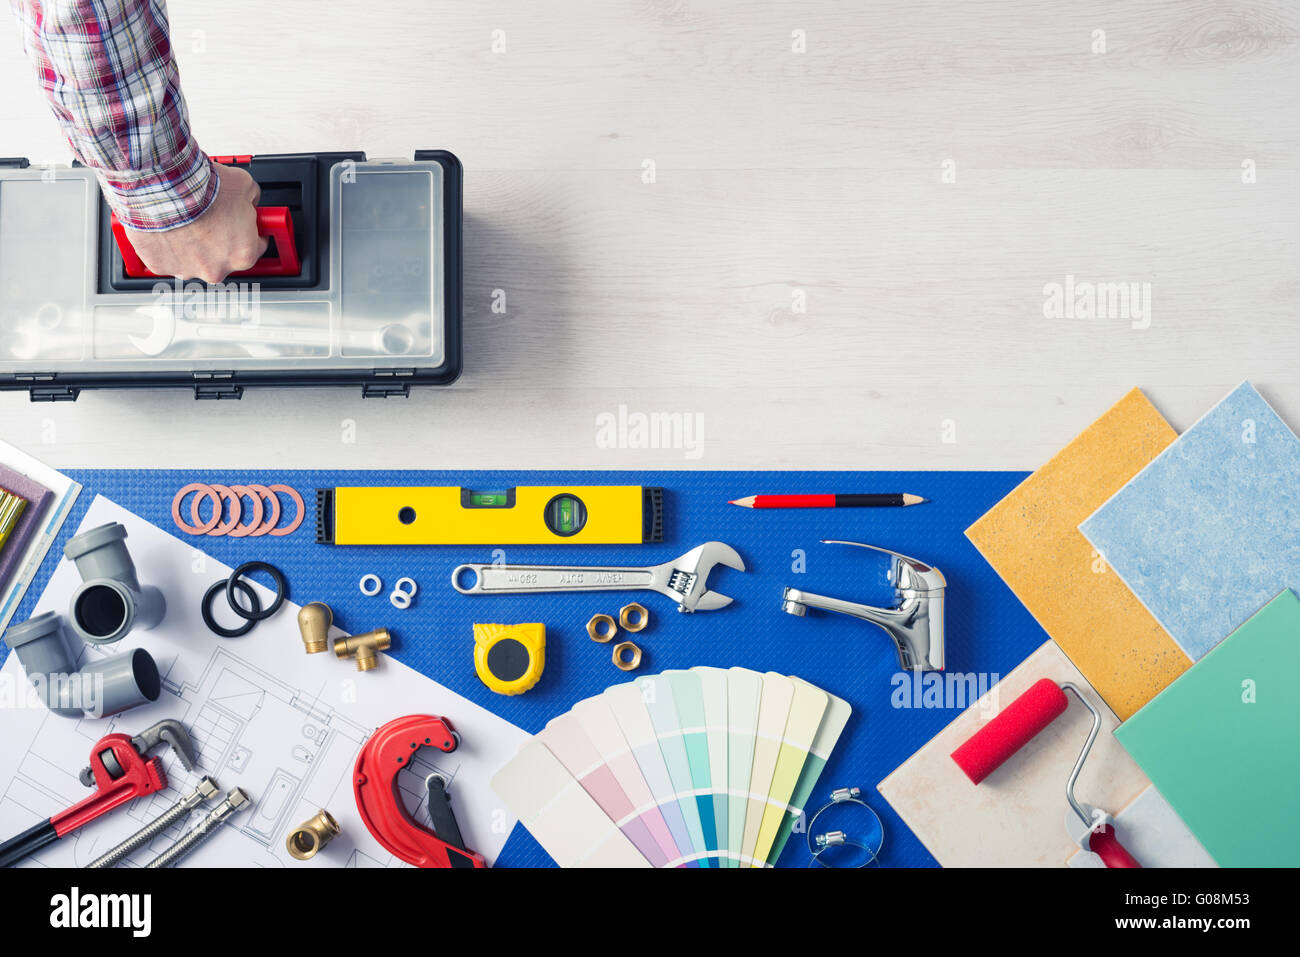 Repairman carrying a toolbox with plumbing tools, tiles and color swatches top view, home service concept Stock Photo